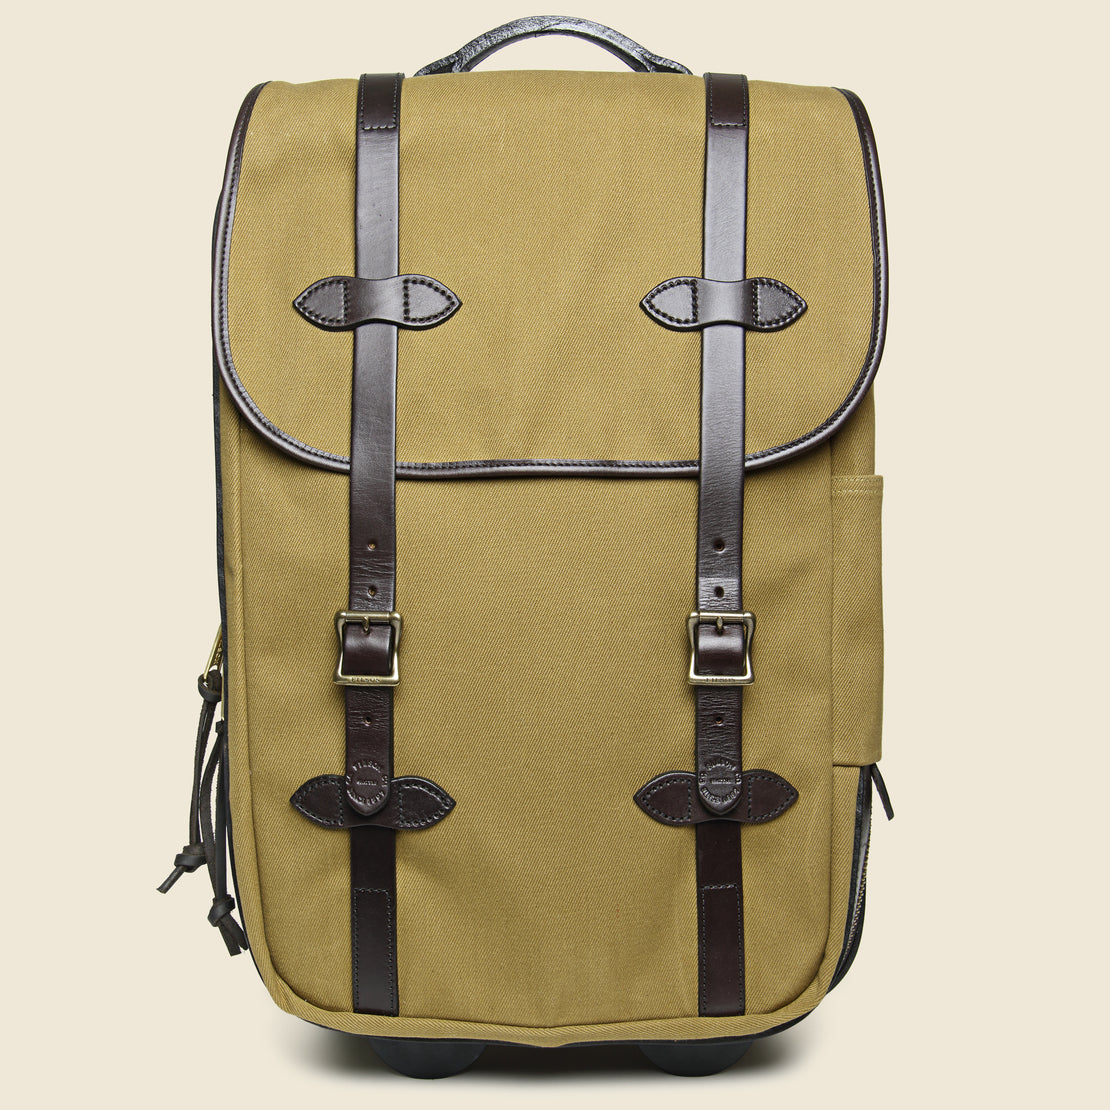 Filson Rolling Carry-On Bag - Tan